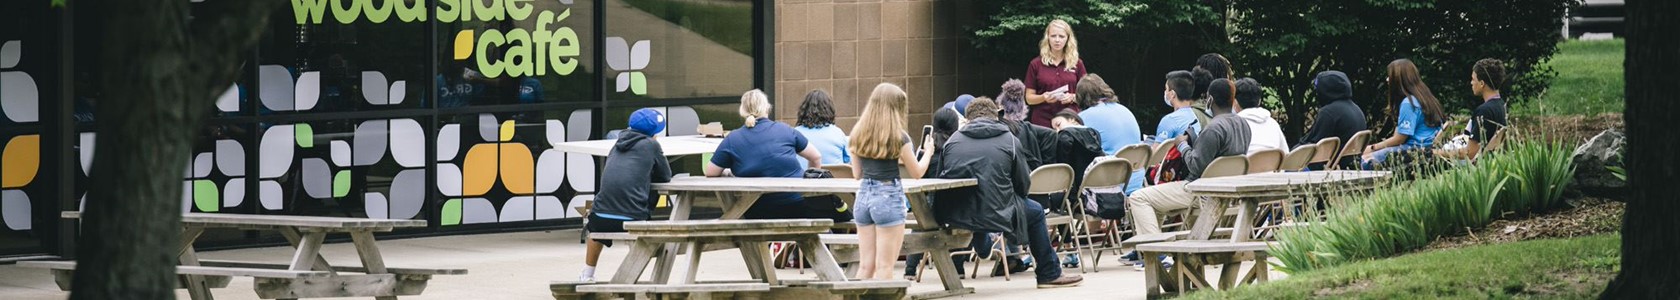 students on picnic tables outside of the woodside cafe